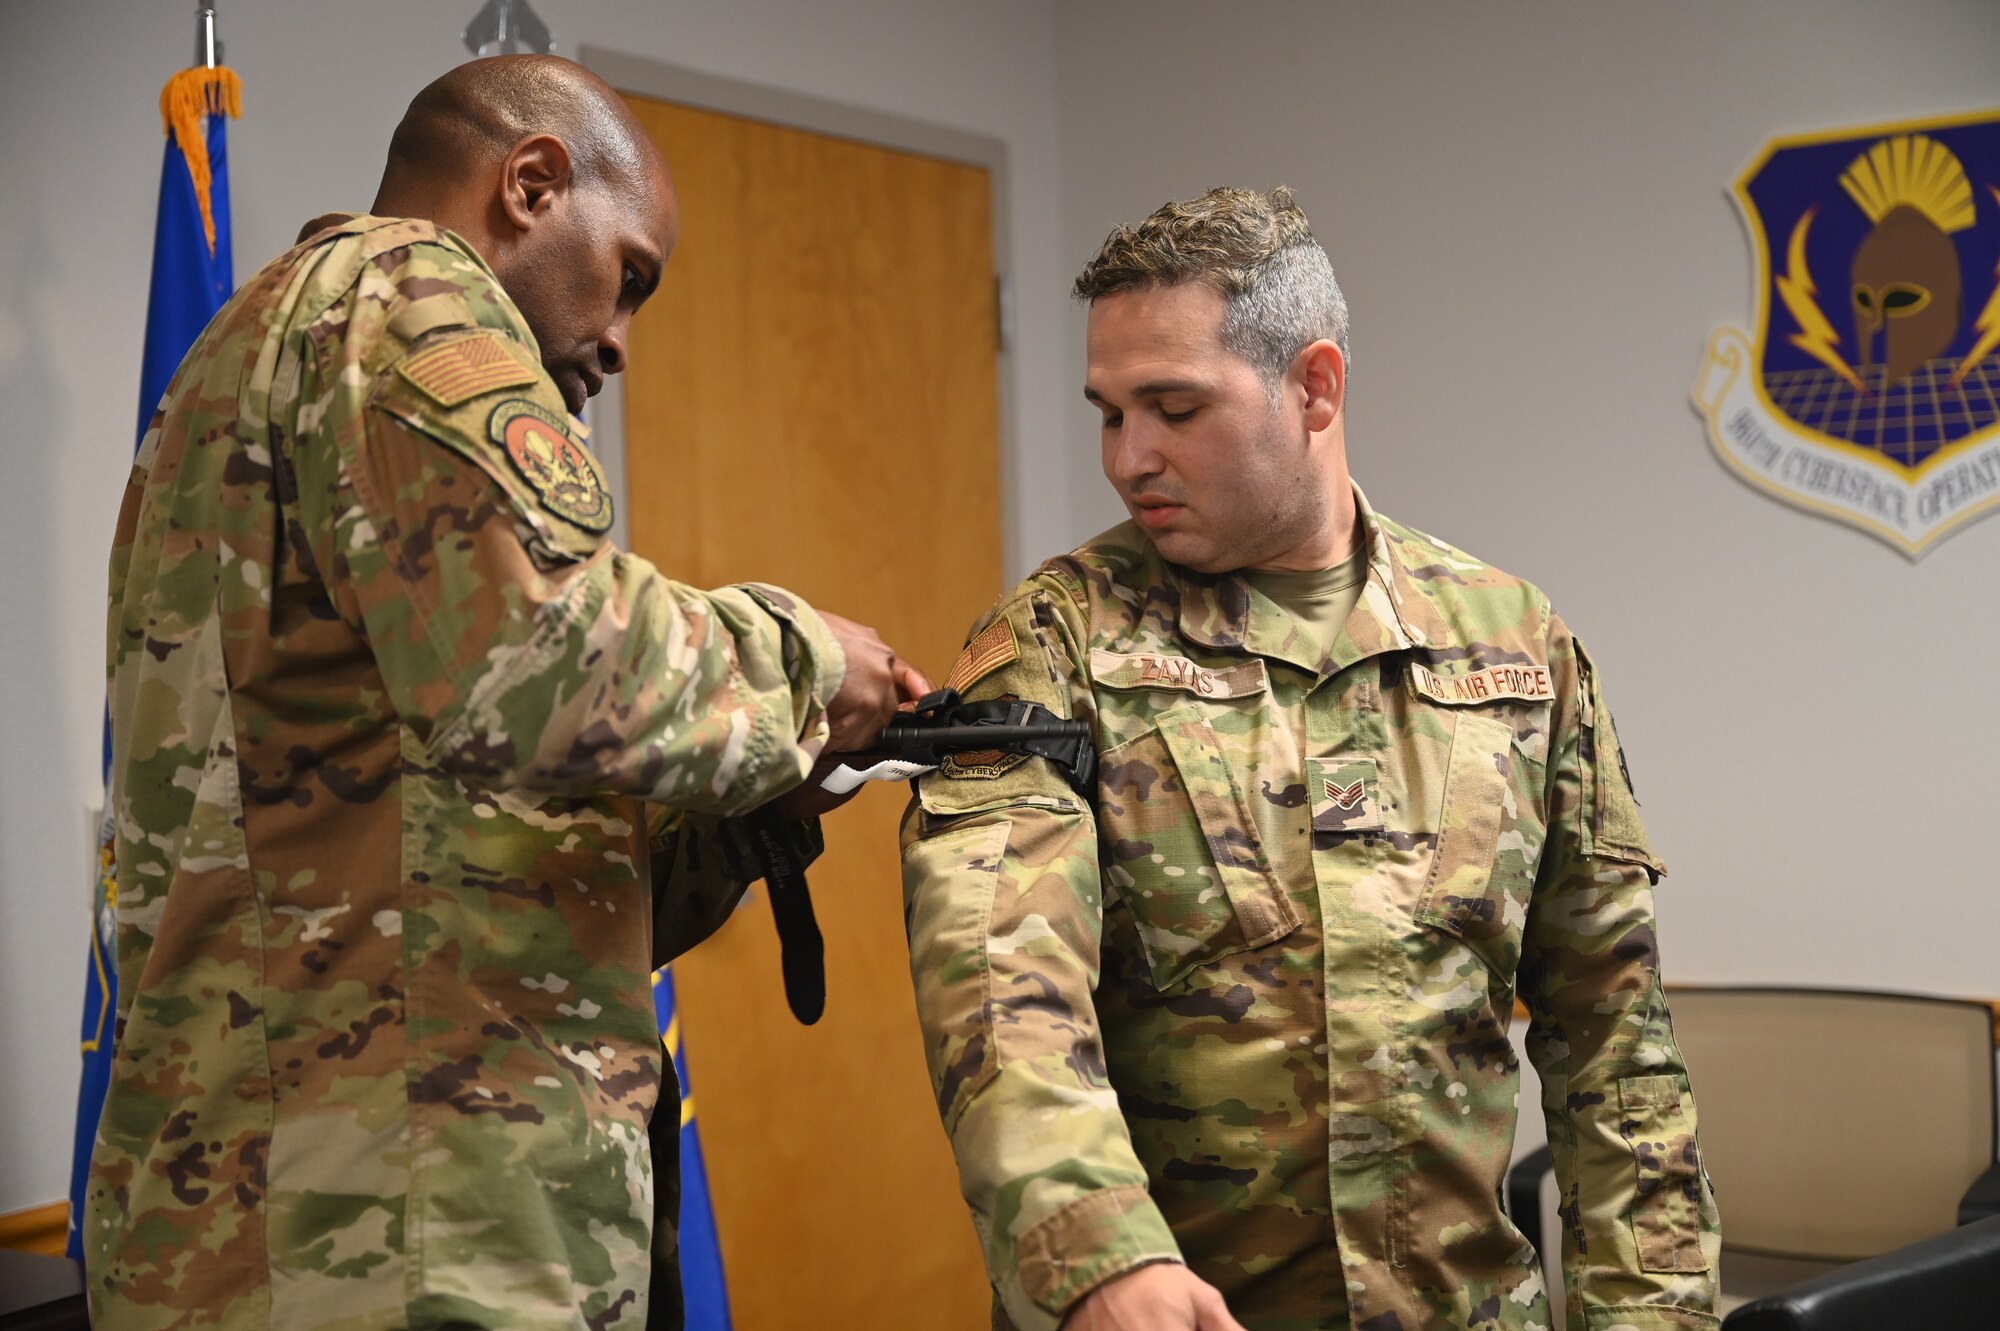 Lt. Col. Jarvis Croff, 960th Operations Support Flight commander, applies a combat application tourniquet to Senior Airman Cesar Zayas, 960th Cyberspace Operations Group client support technician, during a tactical combat casualty care training class June 4, 2022, at Joint Base San Antonio-Chapman Training Annex, Texas.